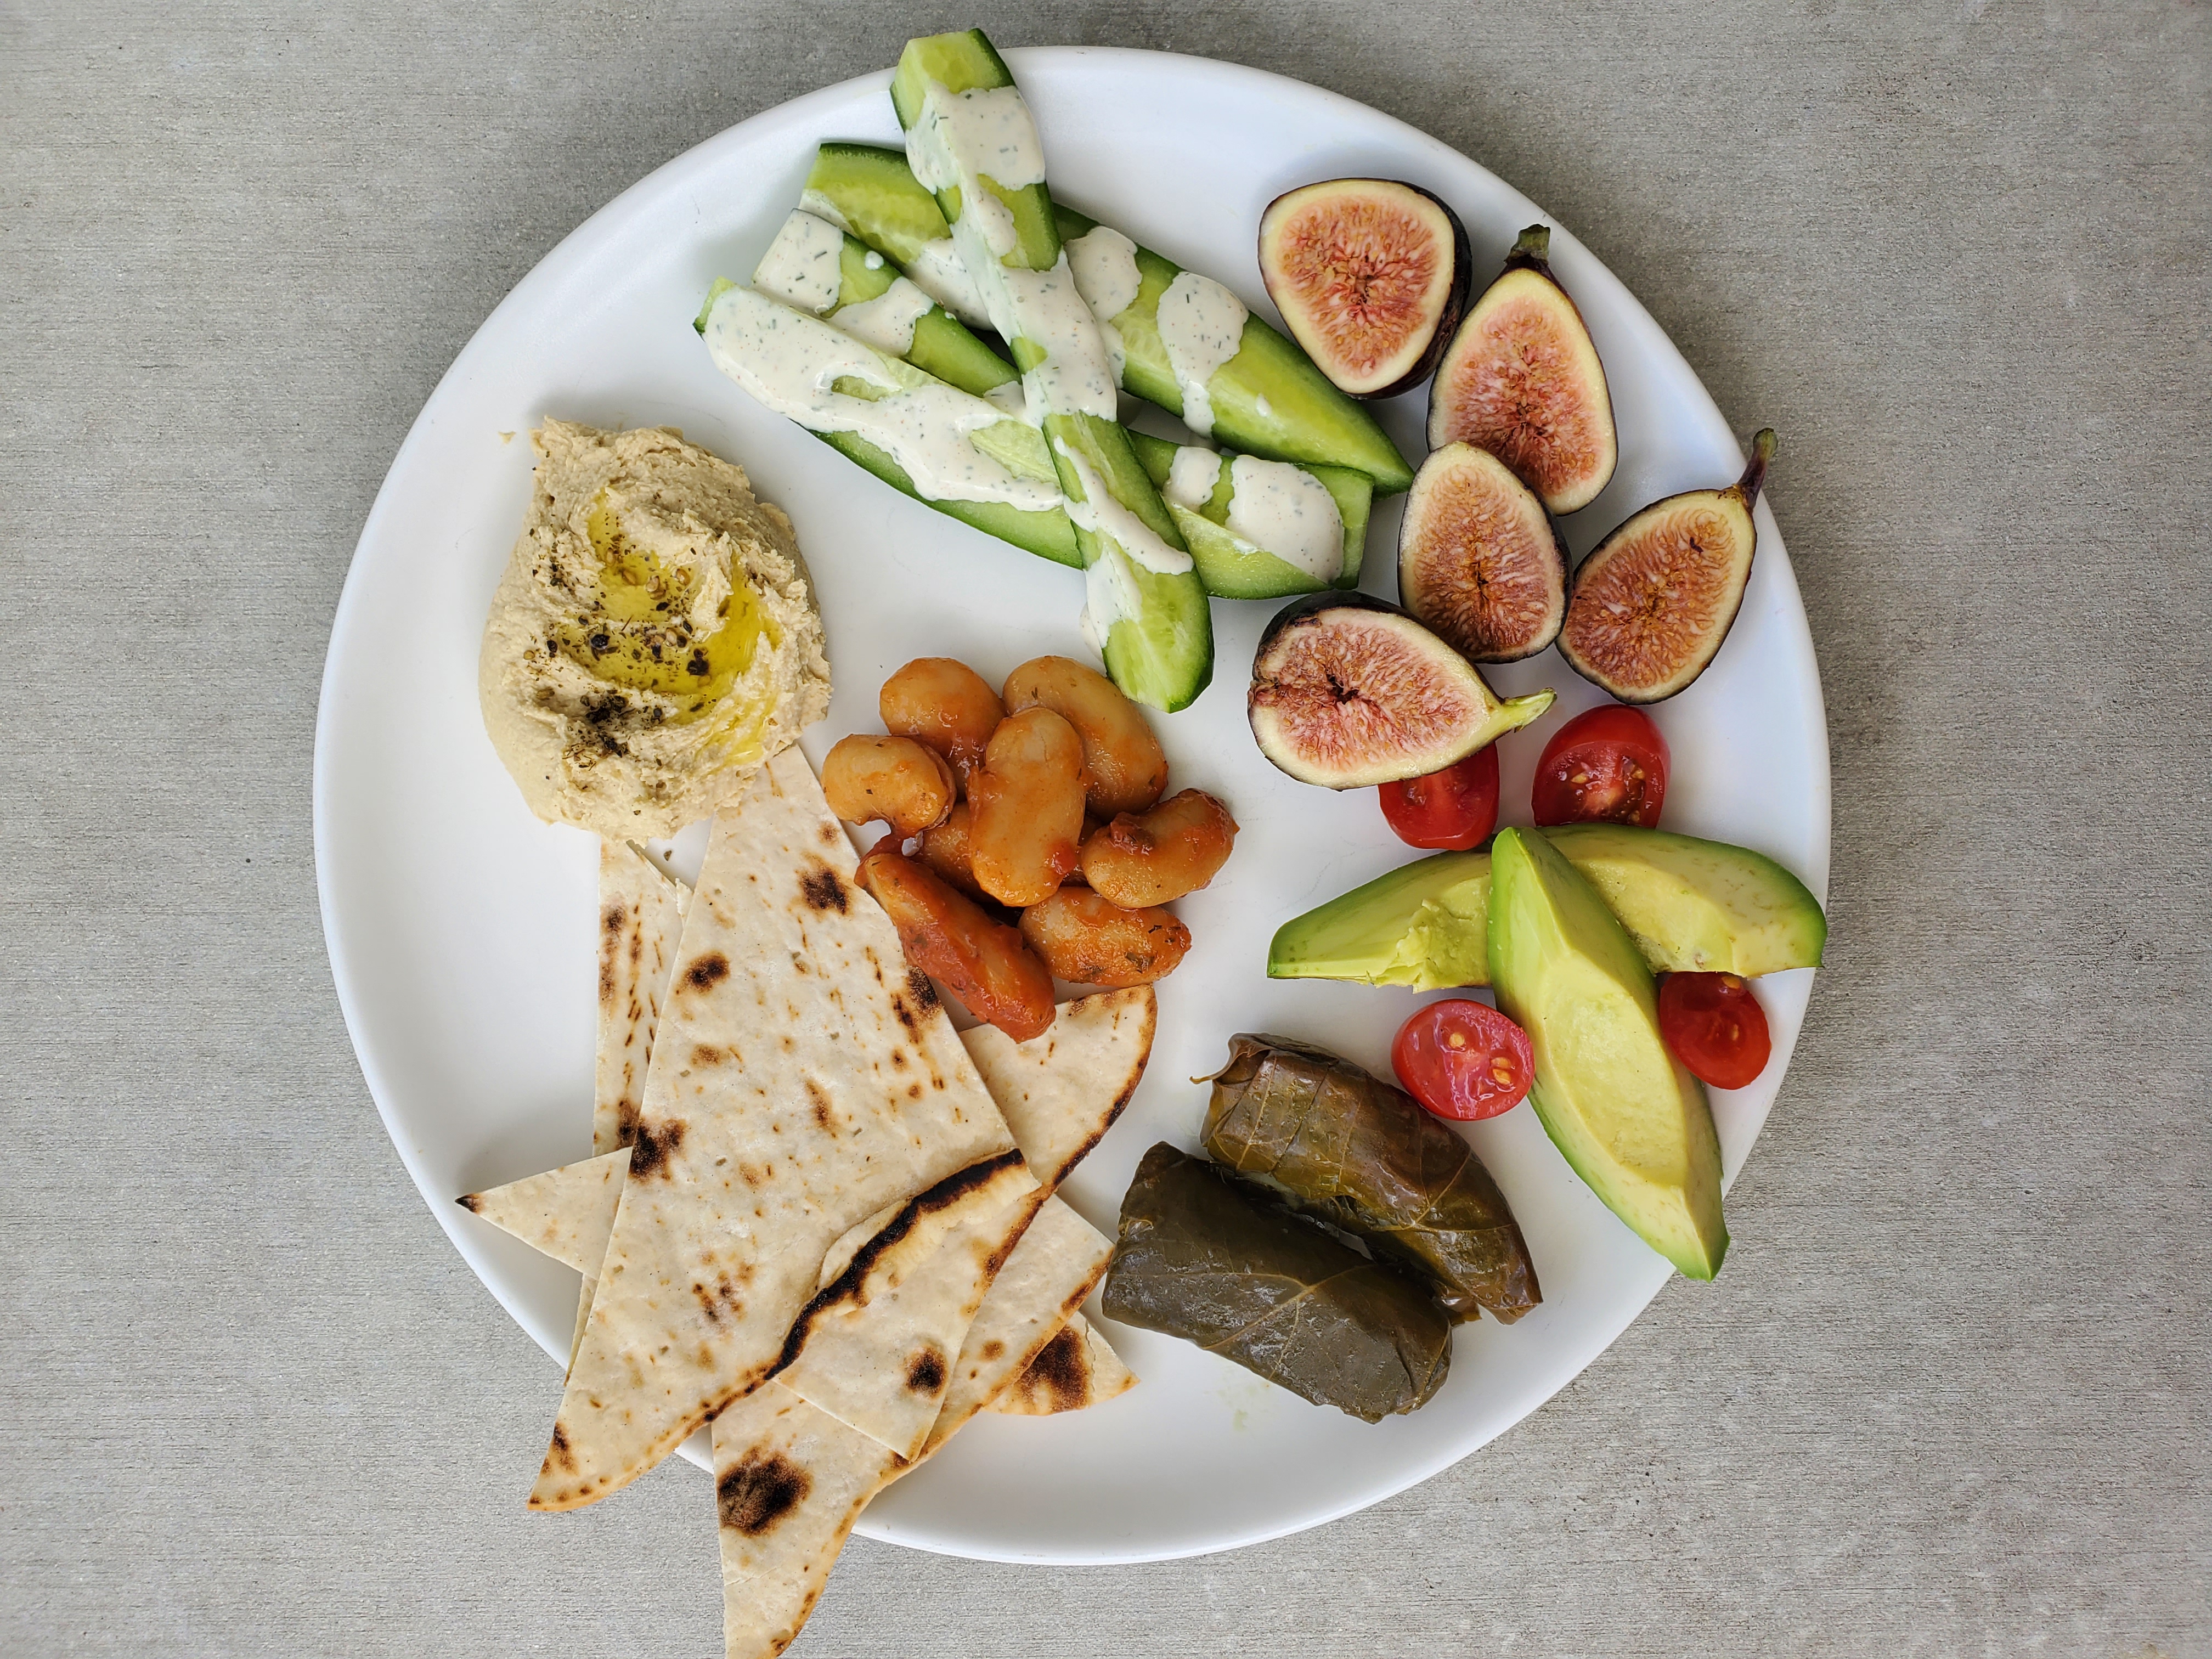 Plate of snack foods: butter beans, grape leaves, hummus, cucumbers, avocado, and figs